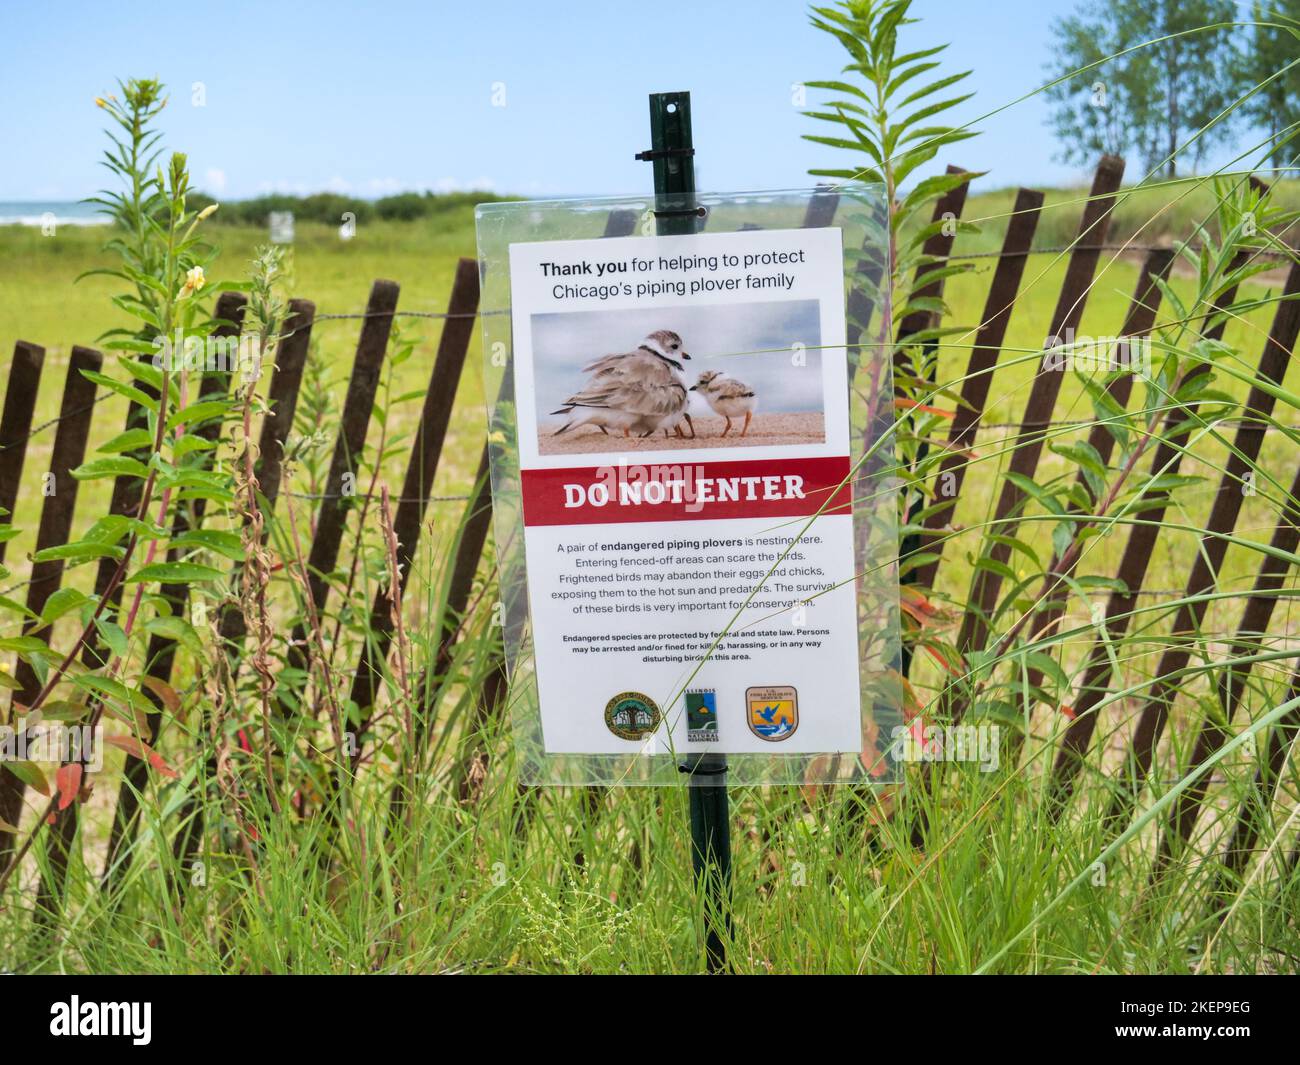 Do Not Enter sign at threatened species, piping plover nesting area. Montrose Beach, Chicago, Illinois. Stock Photo